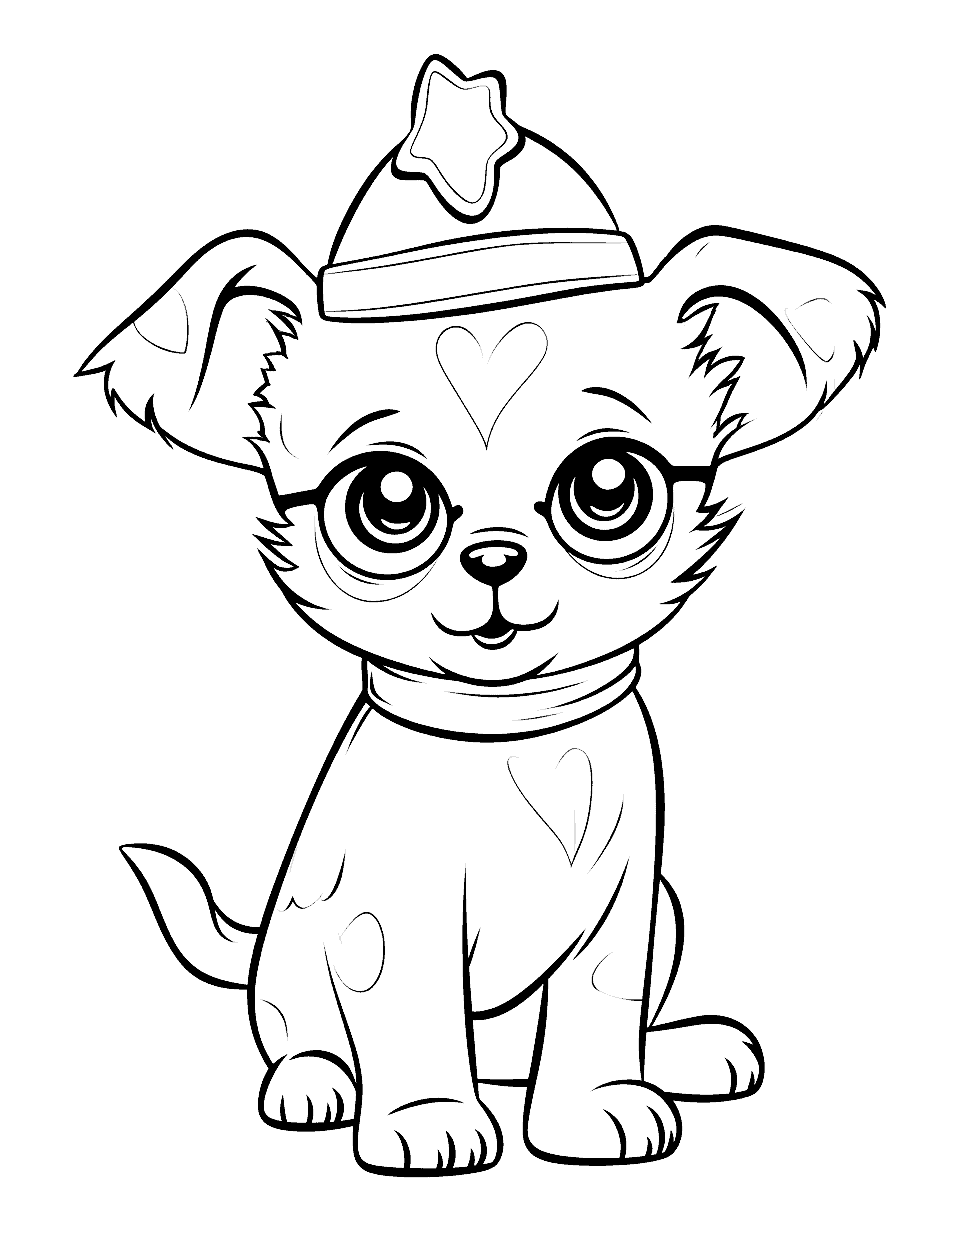 Party Time Puppy Celebrating New Year Coloring Page - A puppy wearing party glasses and a hat, celebrating the New Year.